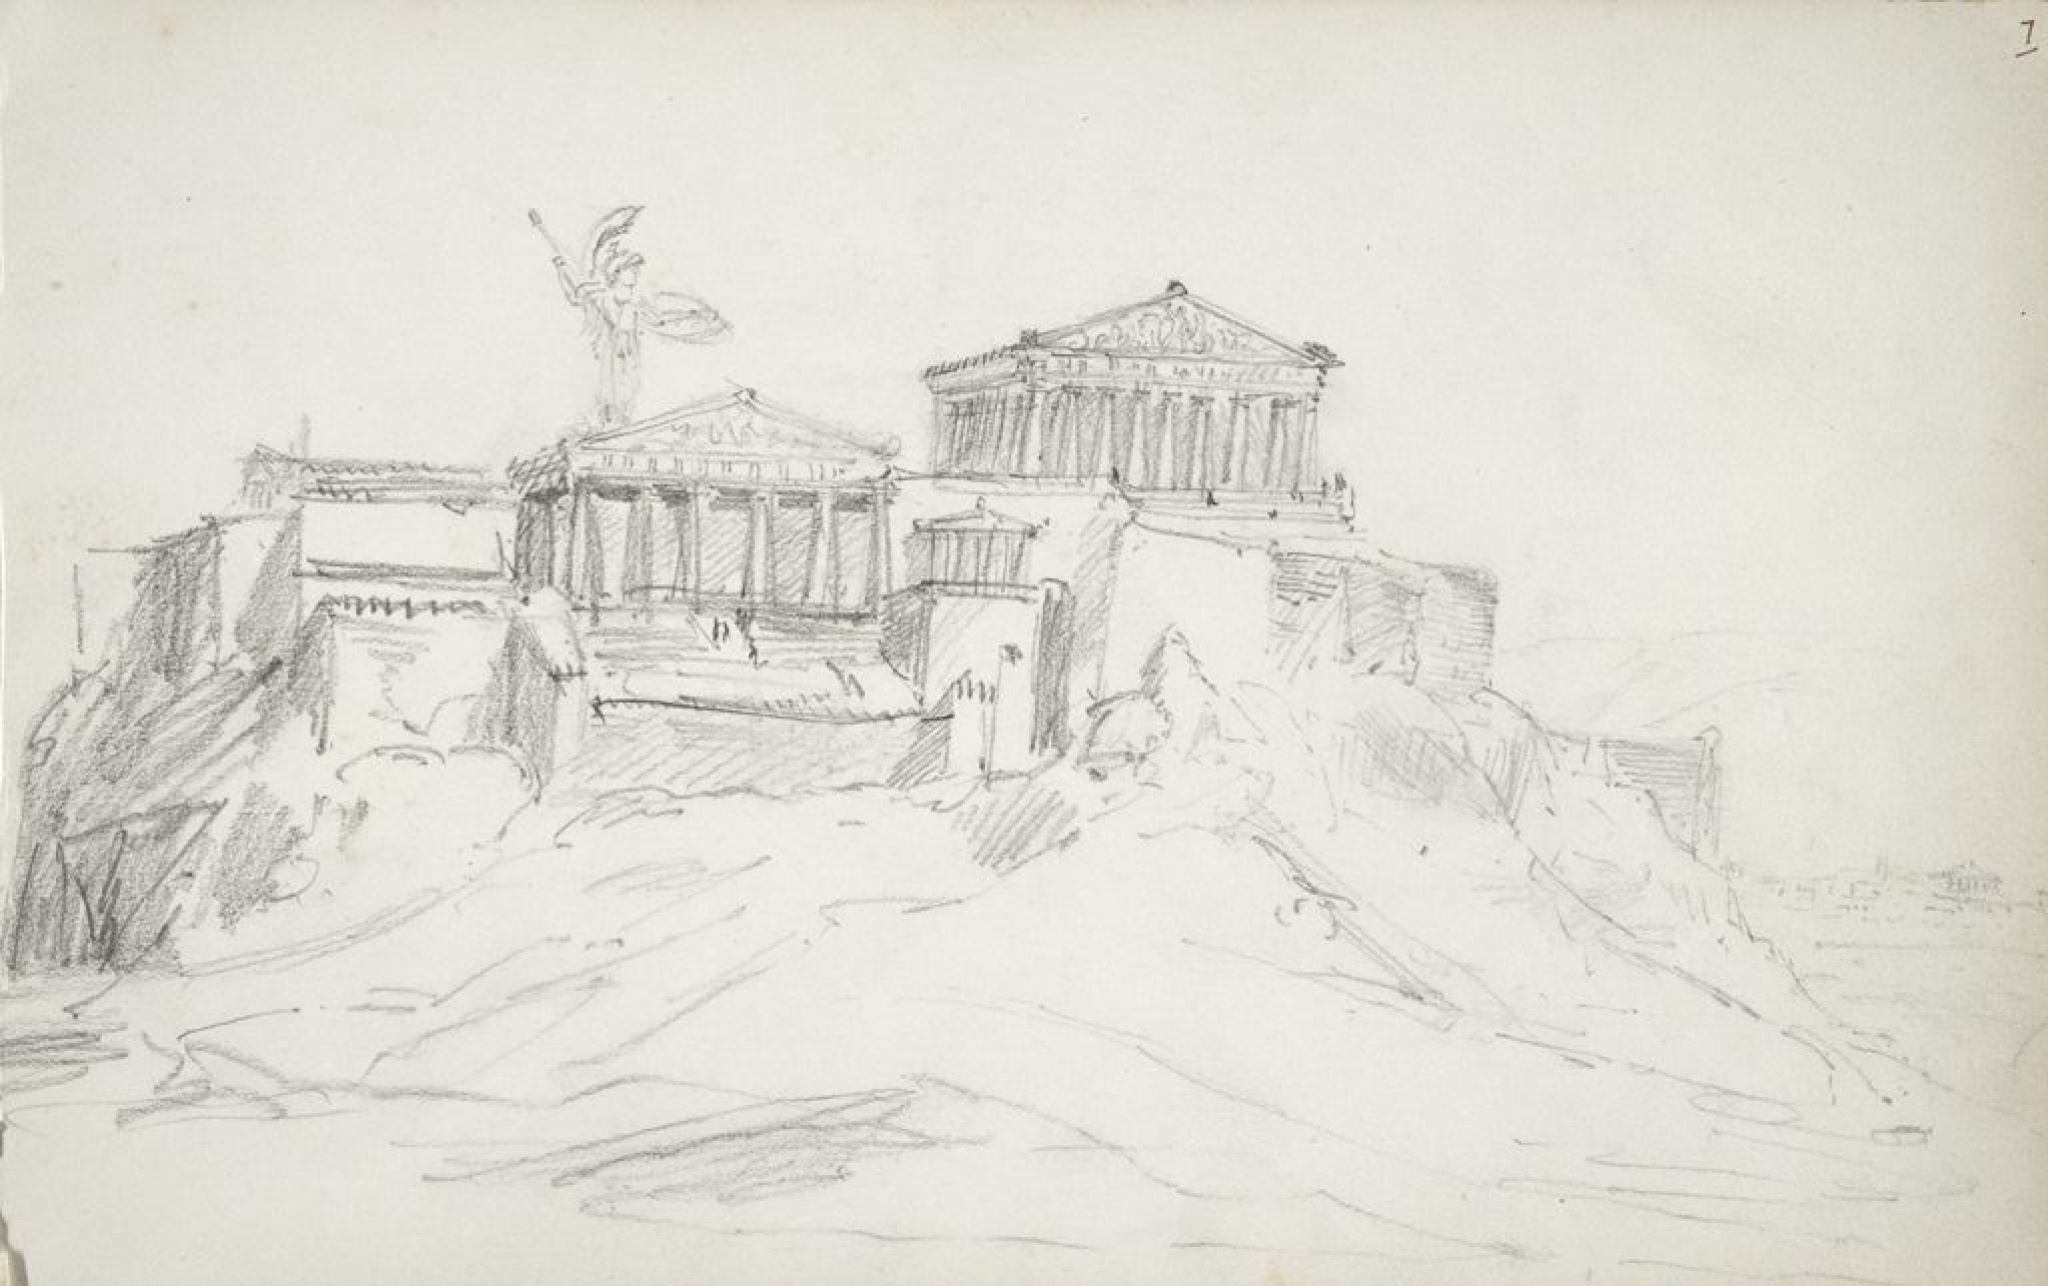 Image of Restored view of the Acropolis of Athens, Greece